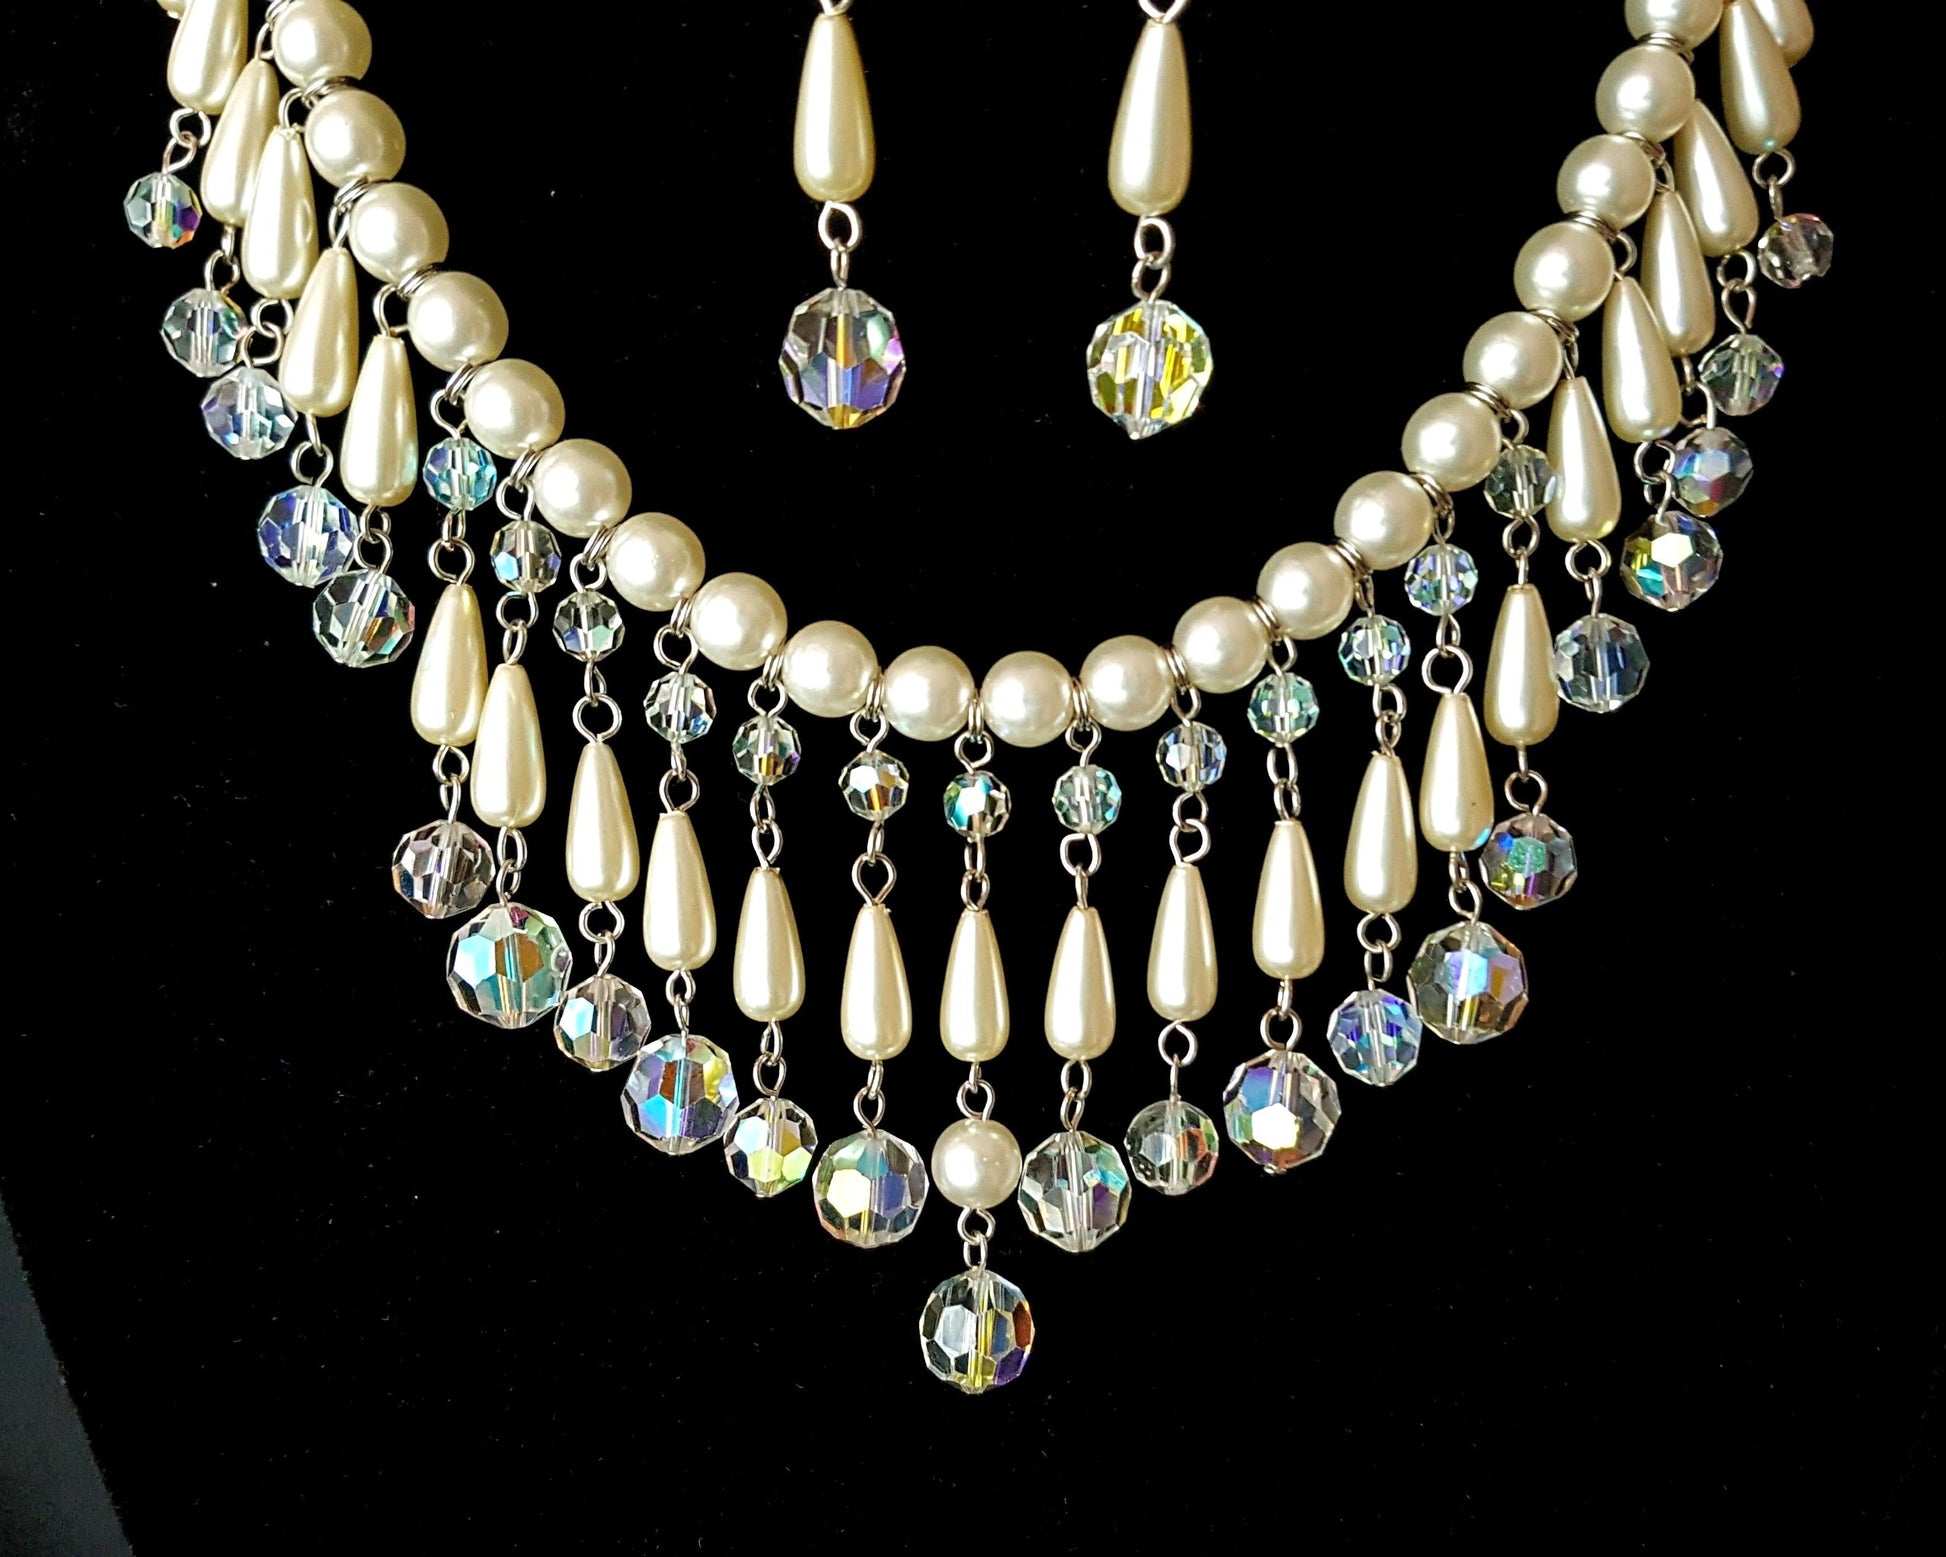 Pearl Crystal Elaborate Beaded Collar Necklace and Earring Set made with White Vintage Pearls and Clear AB Vintage Crystal